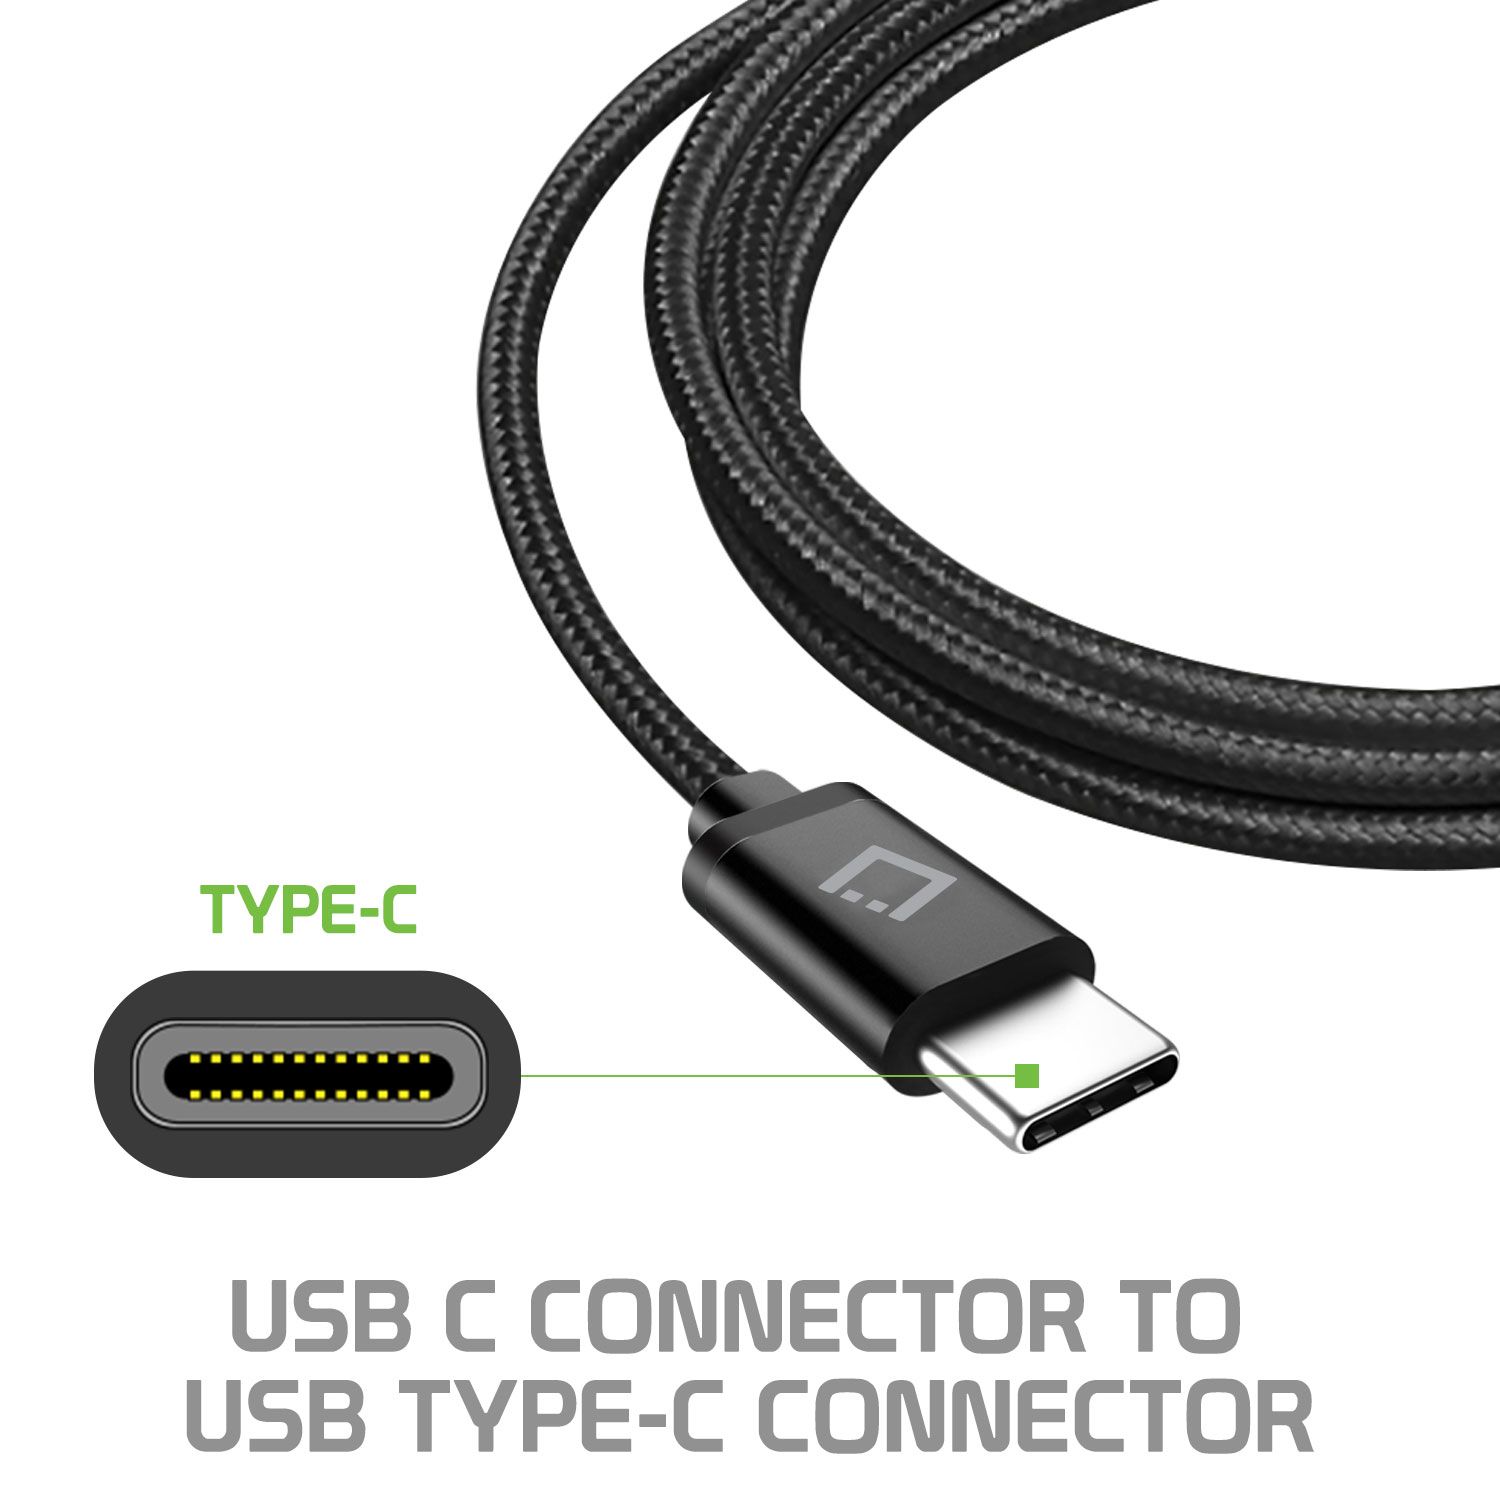 Cellet USB-C to USB-C Cable Compatible with Nokia C2 Tava, Heavy Duty Braided USB Type-C to Type-C Cable (6 feet/1.8 meters) and Atom Wipe - image 2 of 9